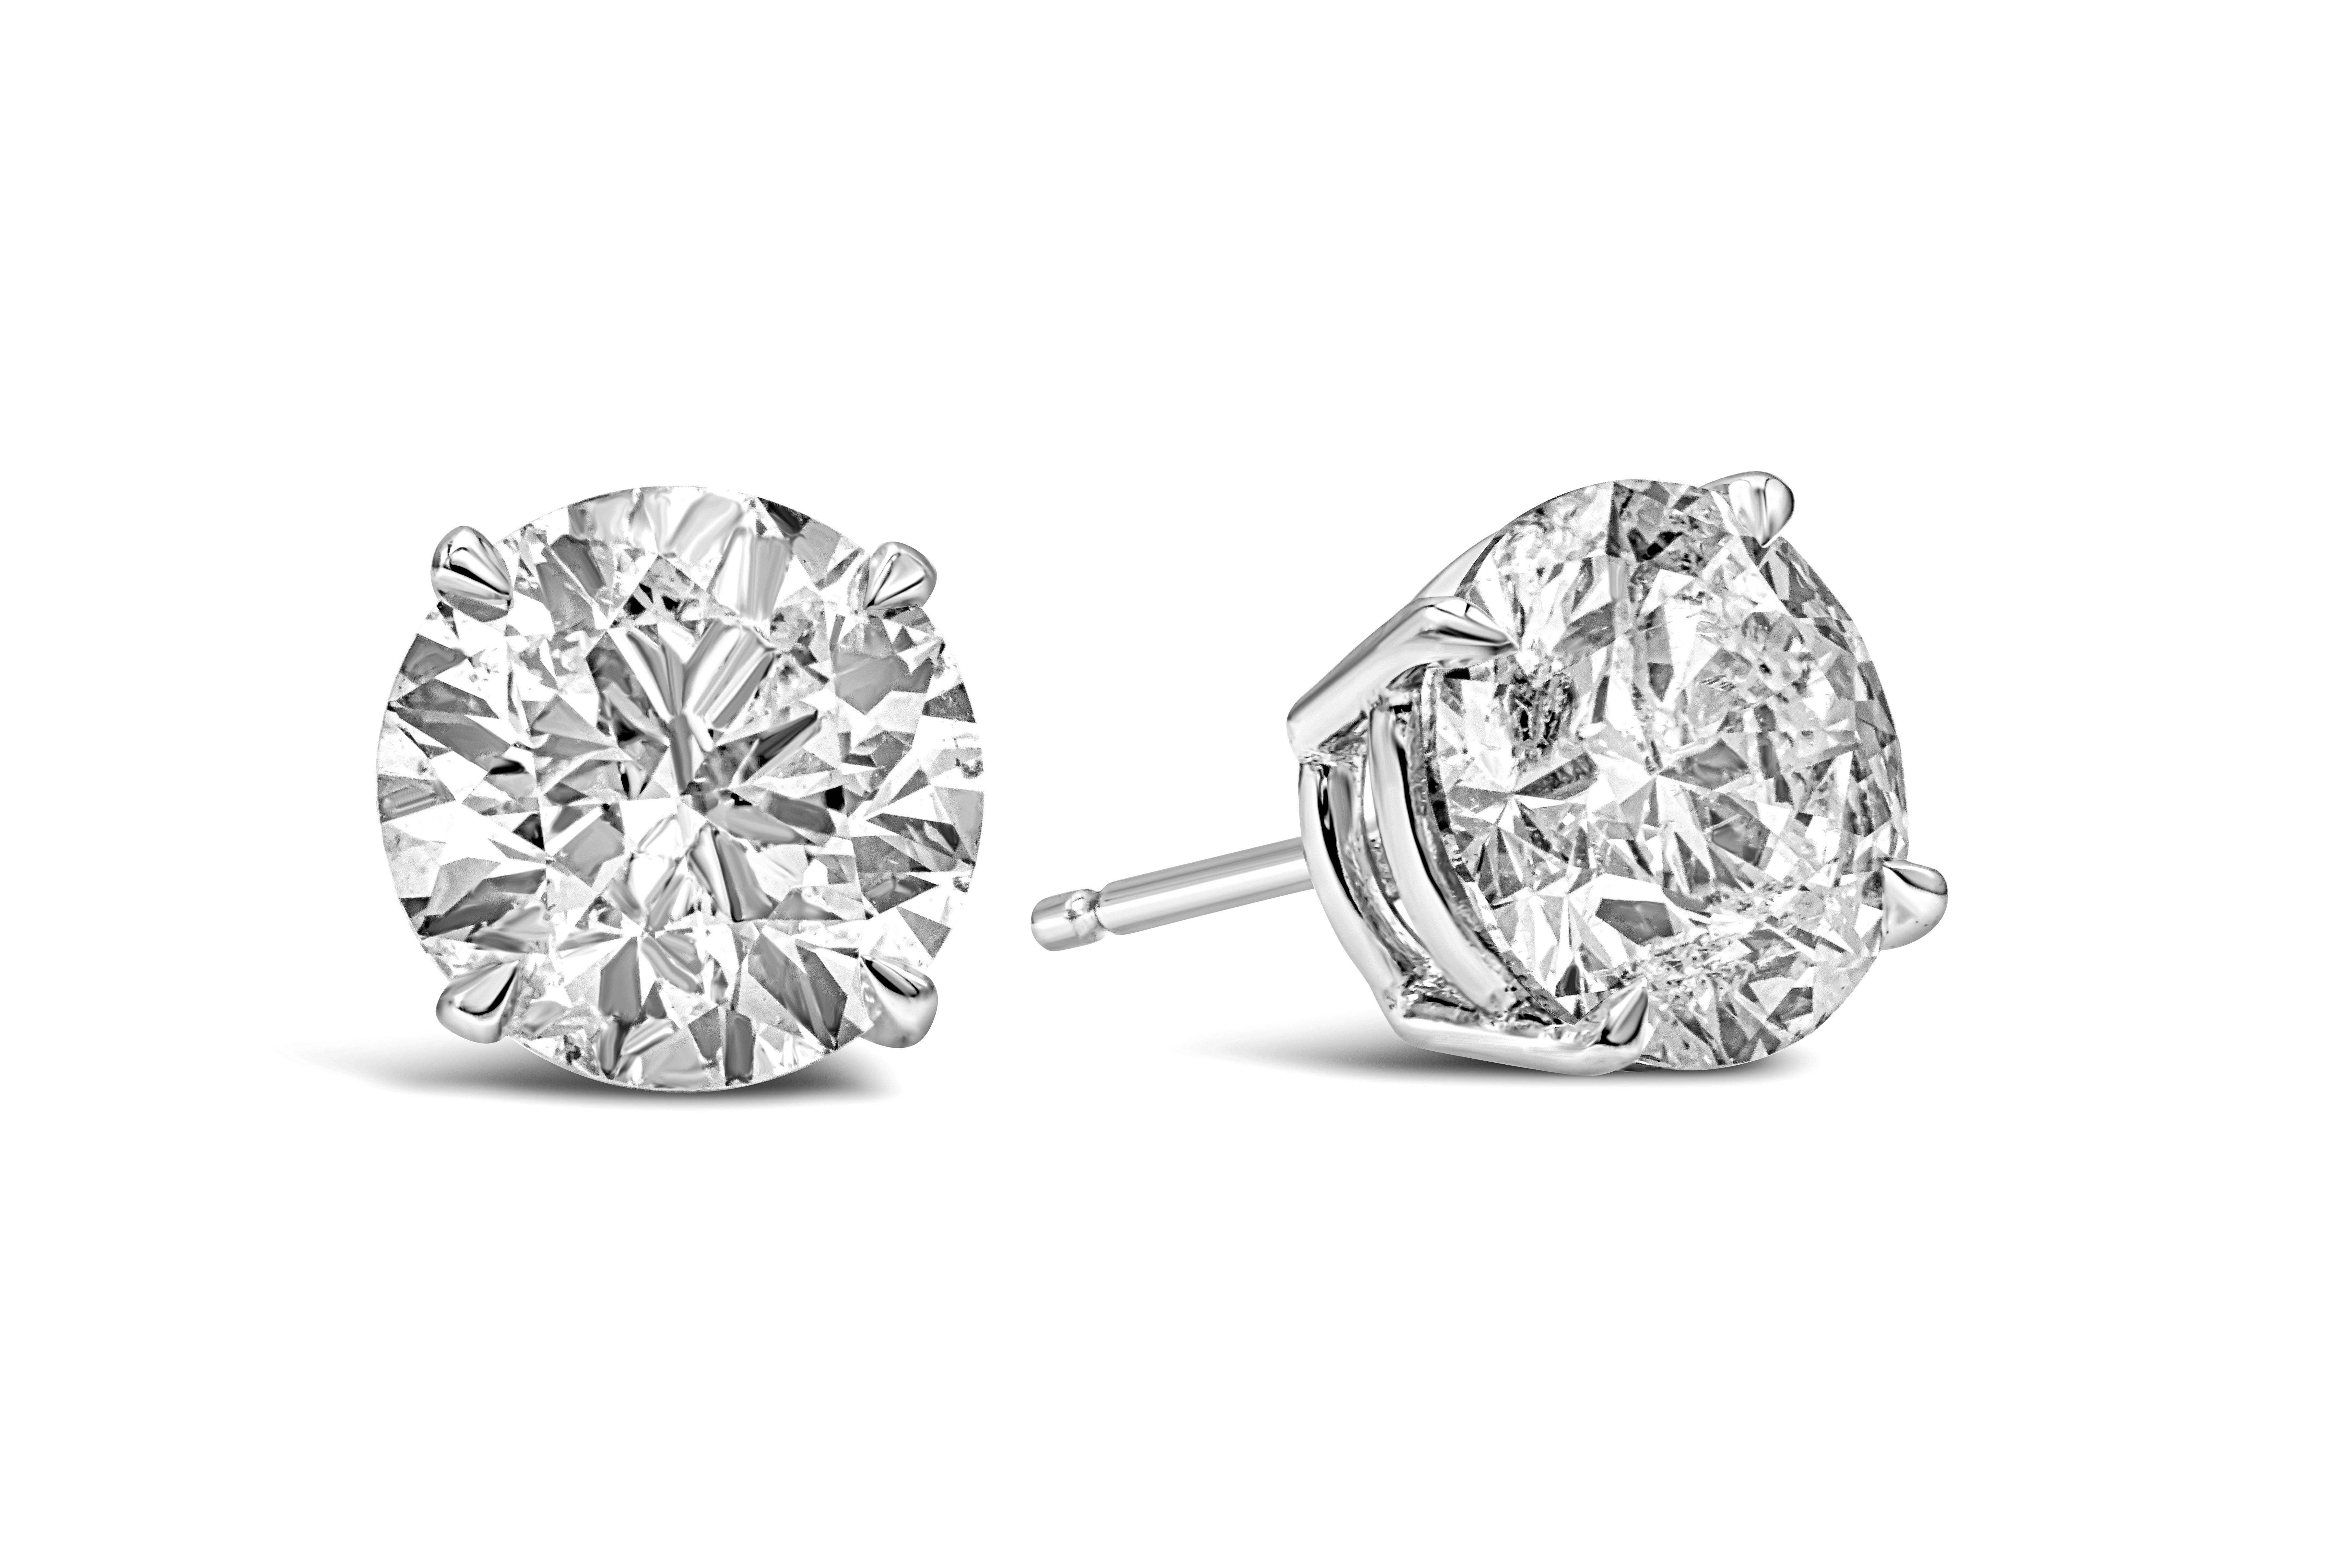 Classic pair of stud earrings showcasing a GIA certified two round brilliant cut diamonds, each weighing 2.01 carats, H-I color and I2 in clarity respectively. Set in a simple four prong basket setting. Finely made in 14k and 18k white gold.

Style